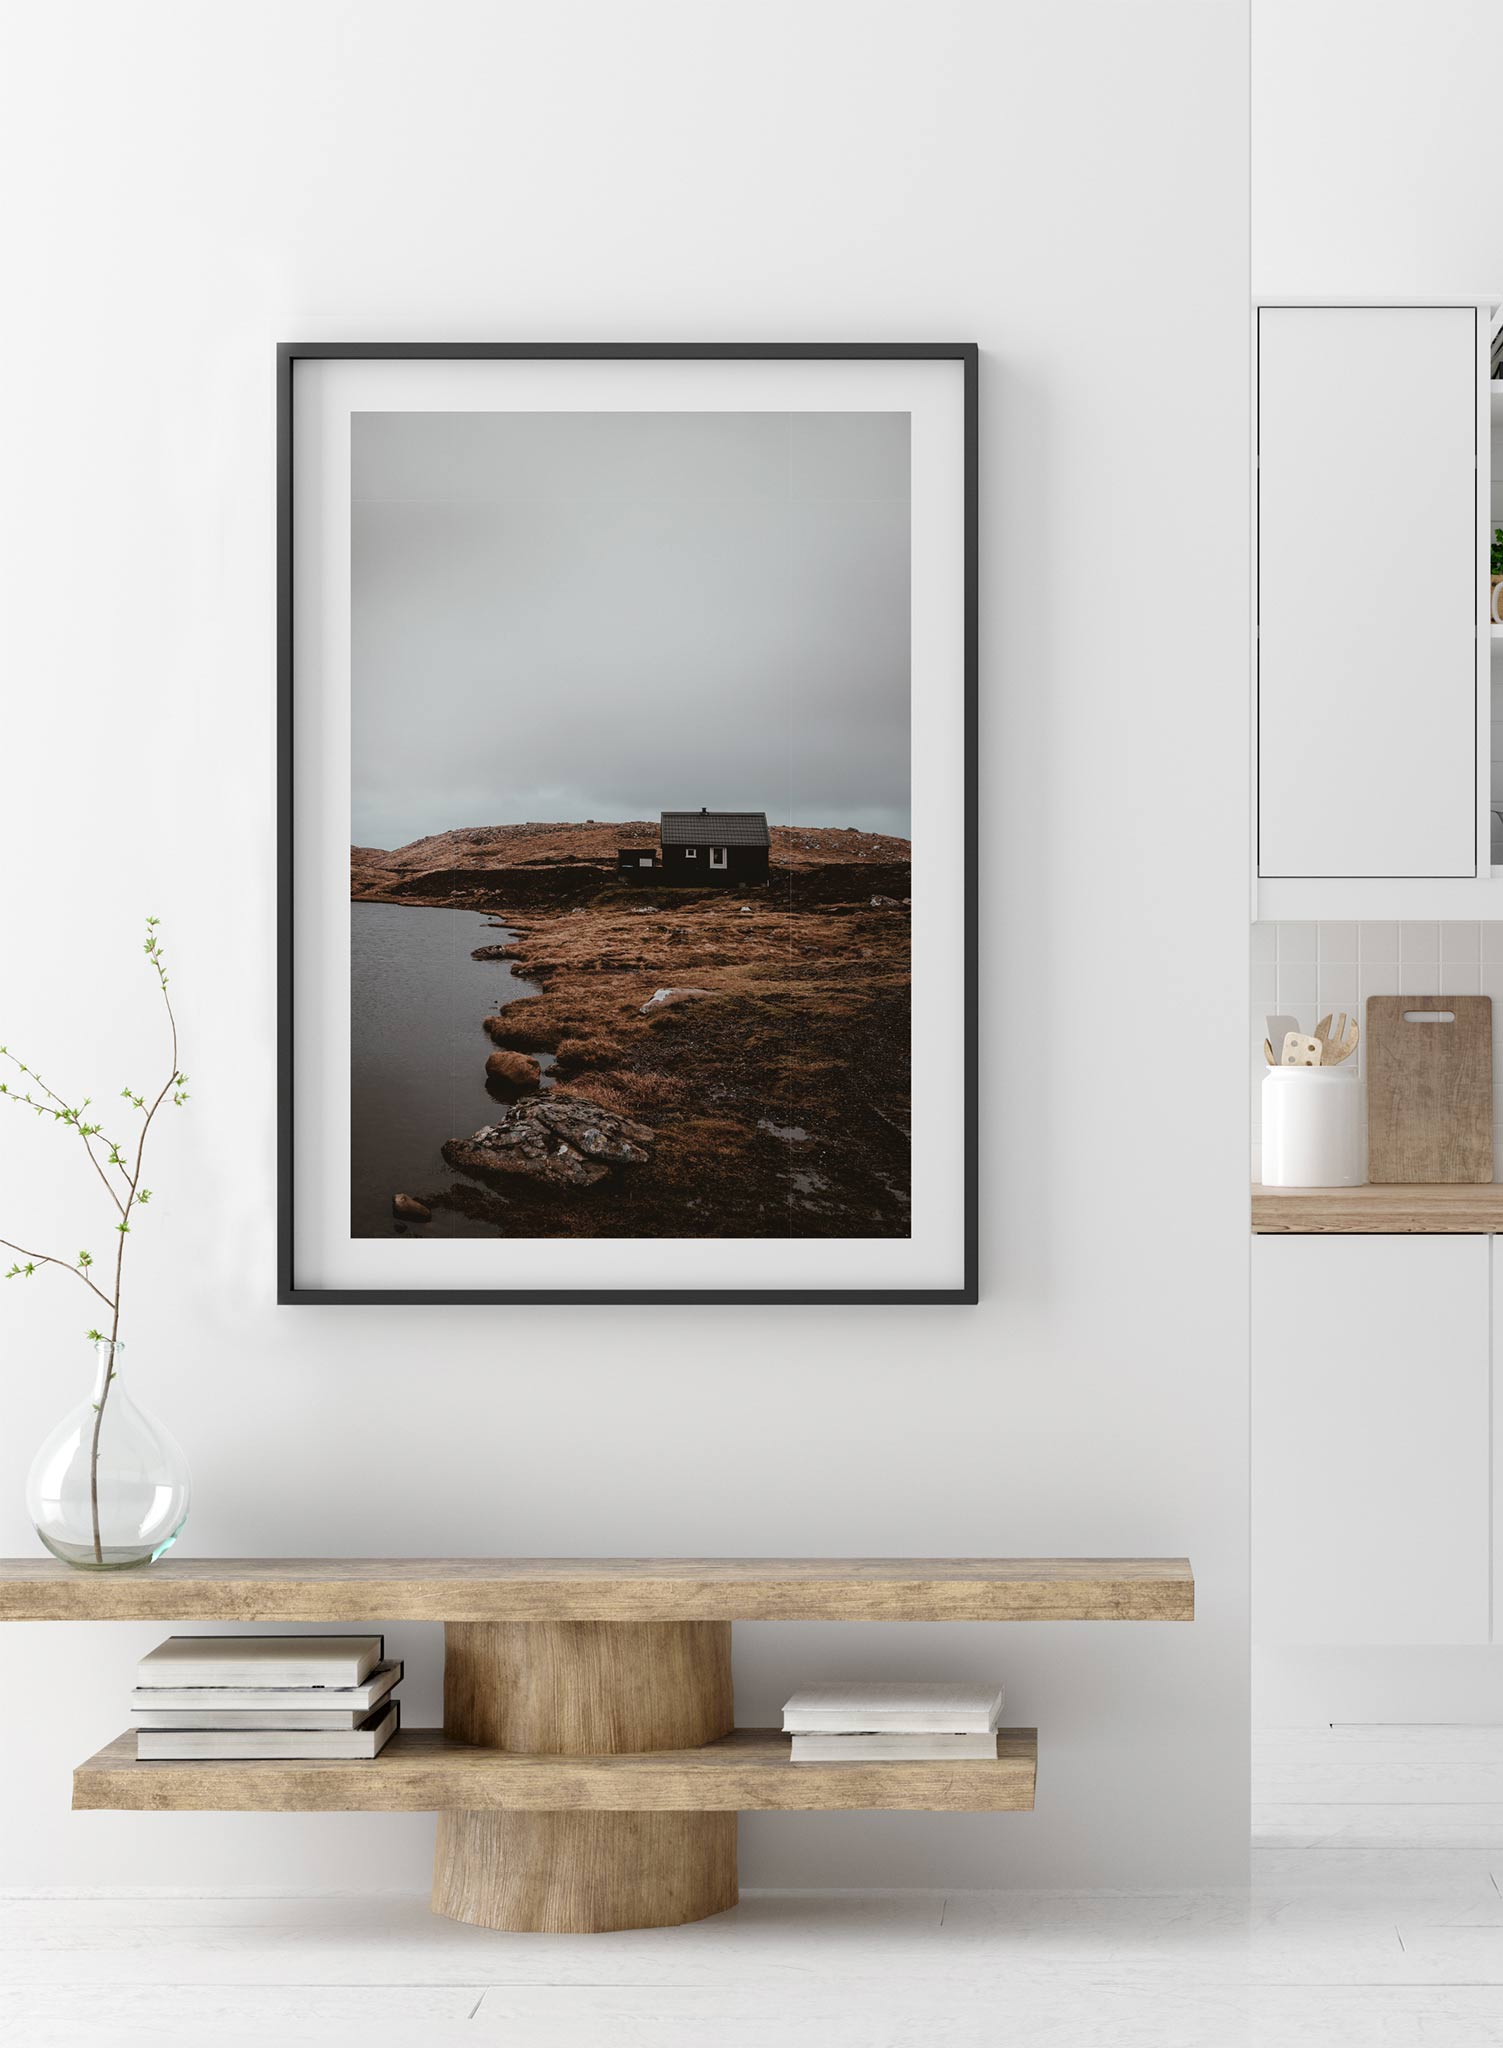 Lakeside View' is a landscape photography poster by Opposite Wall of a quaint cottage style house on orange and brown grass overlooking a quiet lake under a cloudy grey sky.